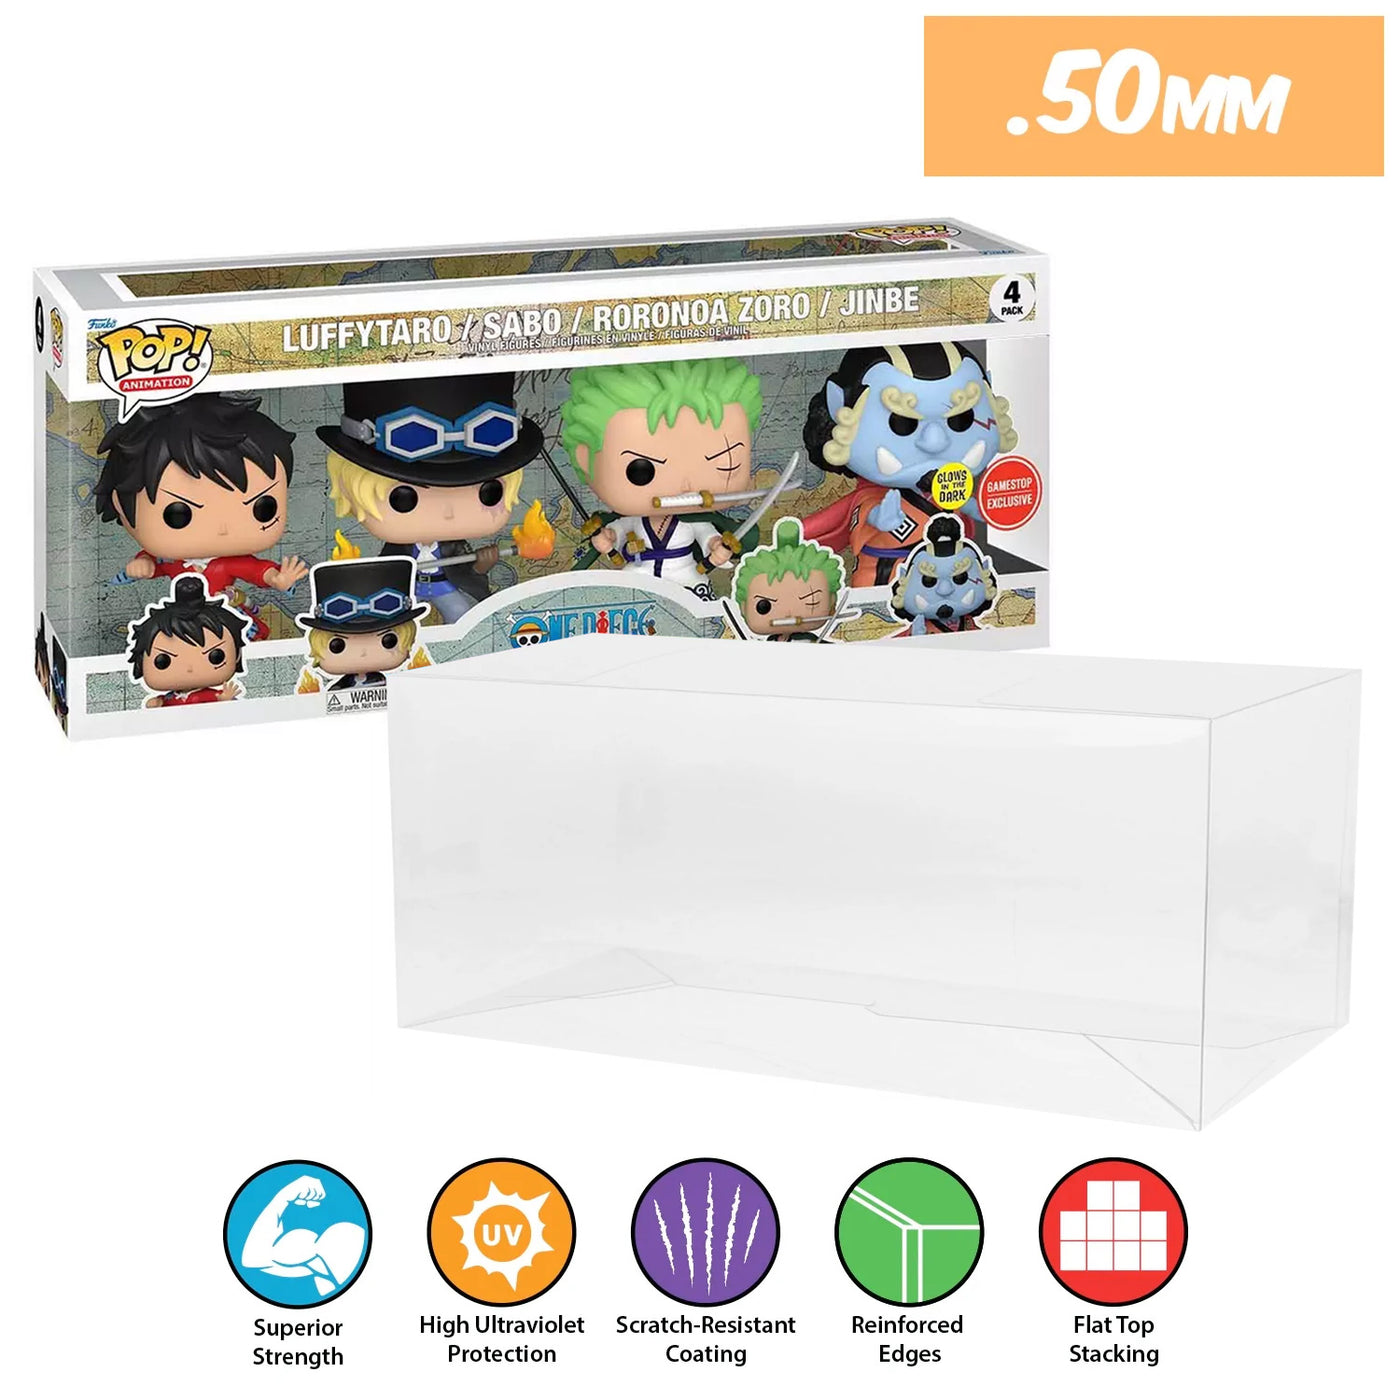 one piece luffytaro sabo roronoa zoro jinbe glow in the dark 4 pack best funko pop protectors thick strong uv scratch flat top stack vinyl display geek plastic shield vaulted eco armor fits collect protect display case kollector protector